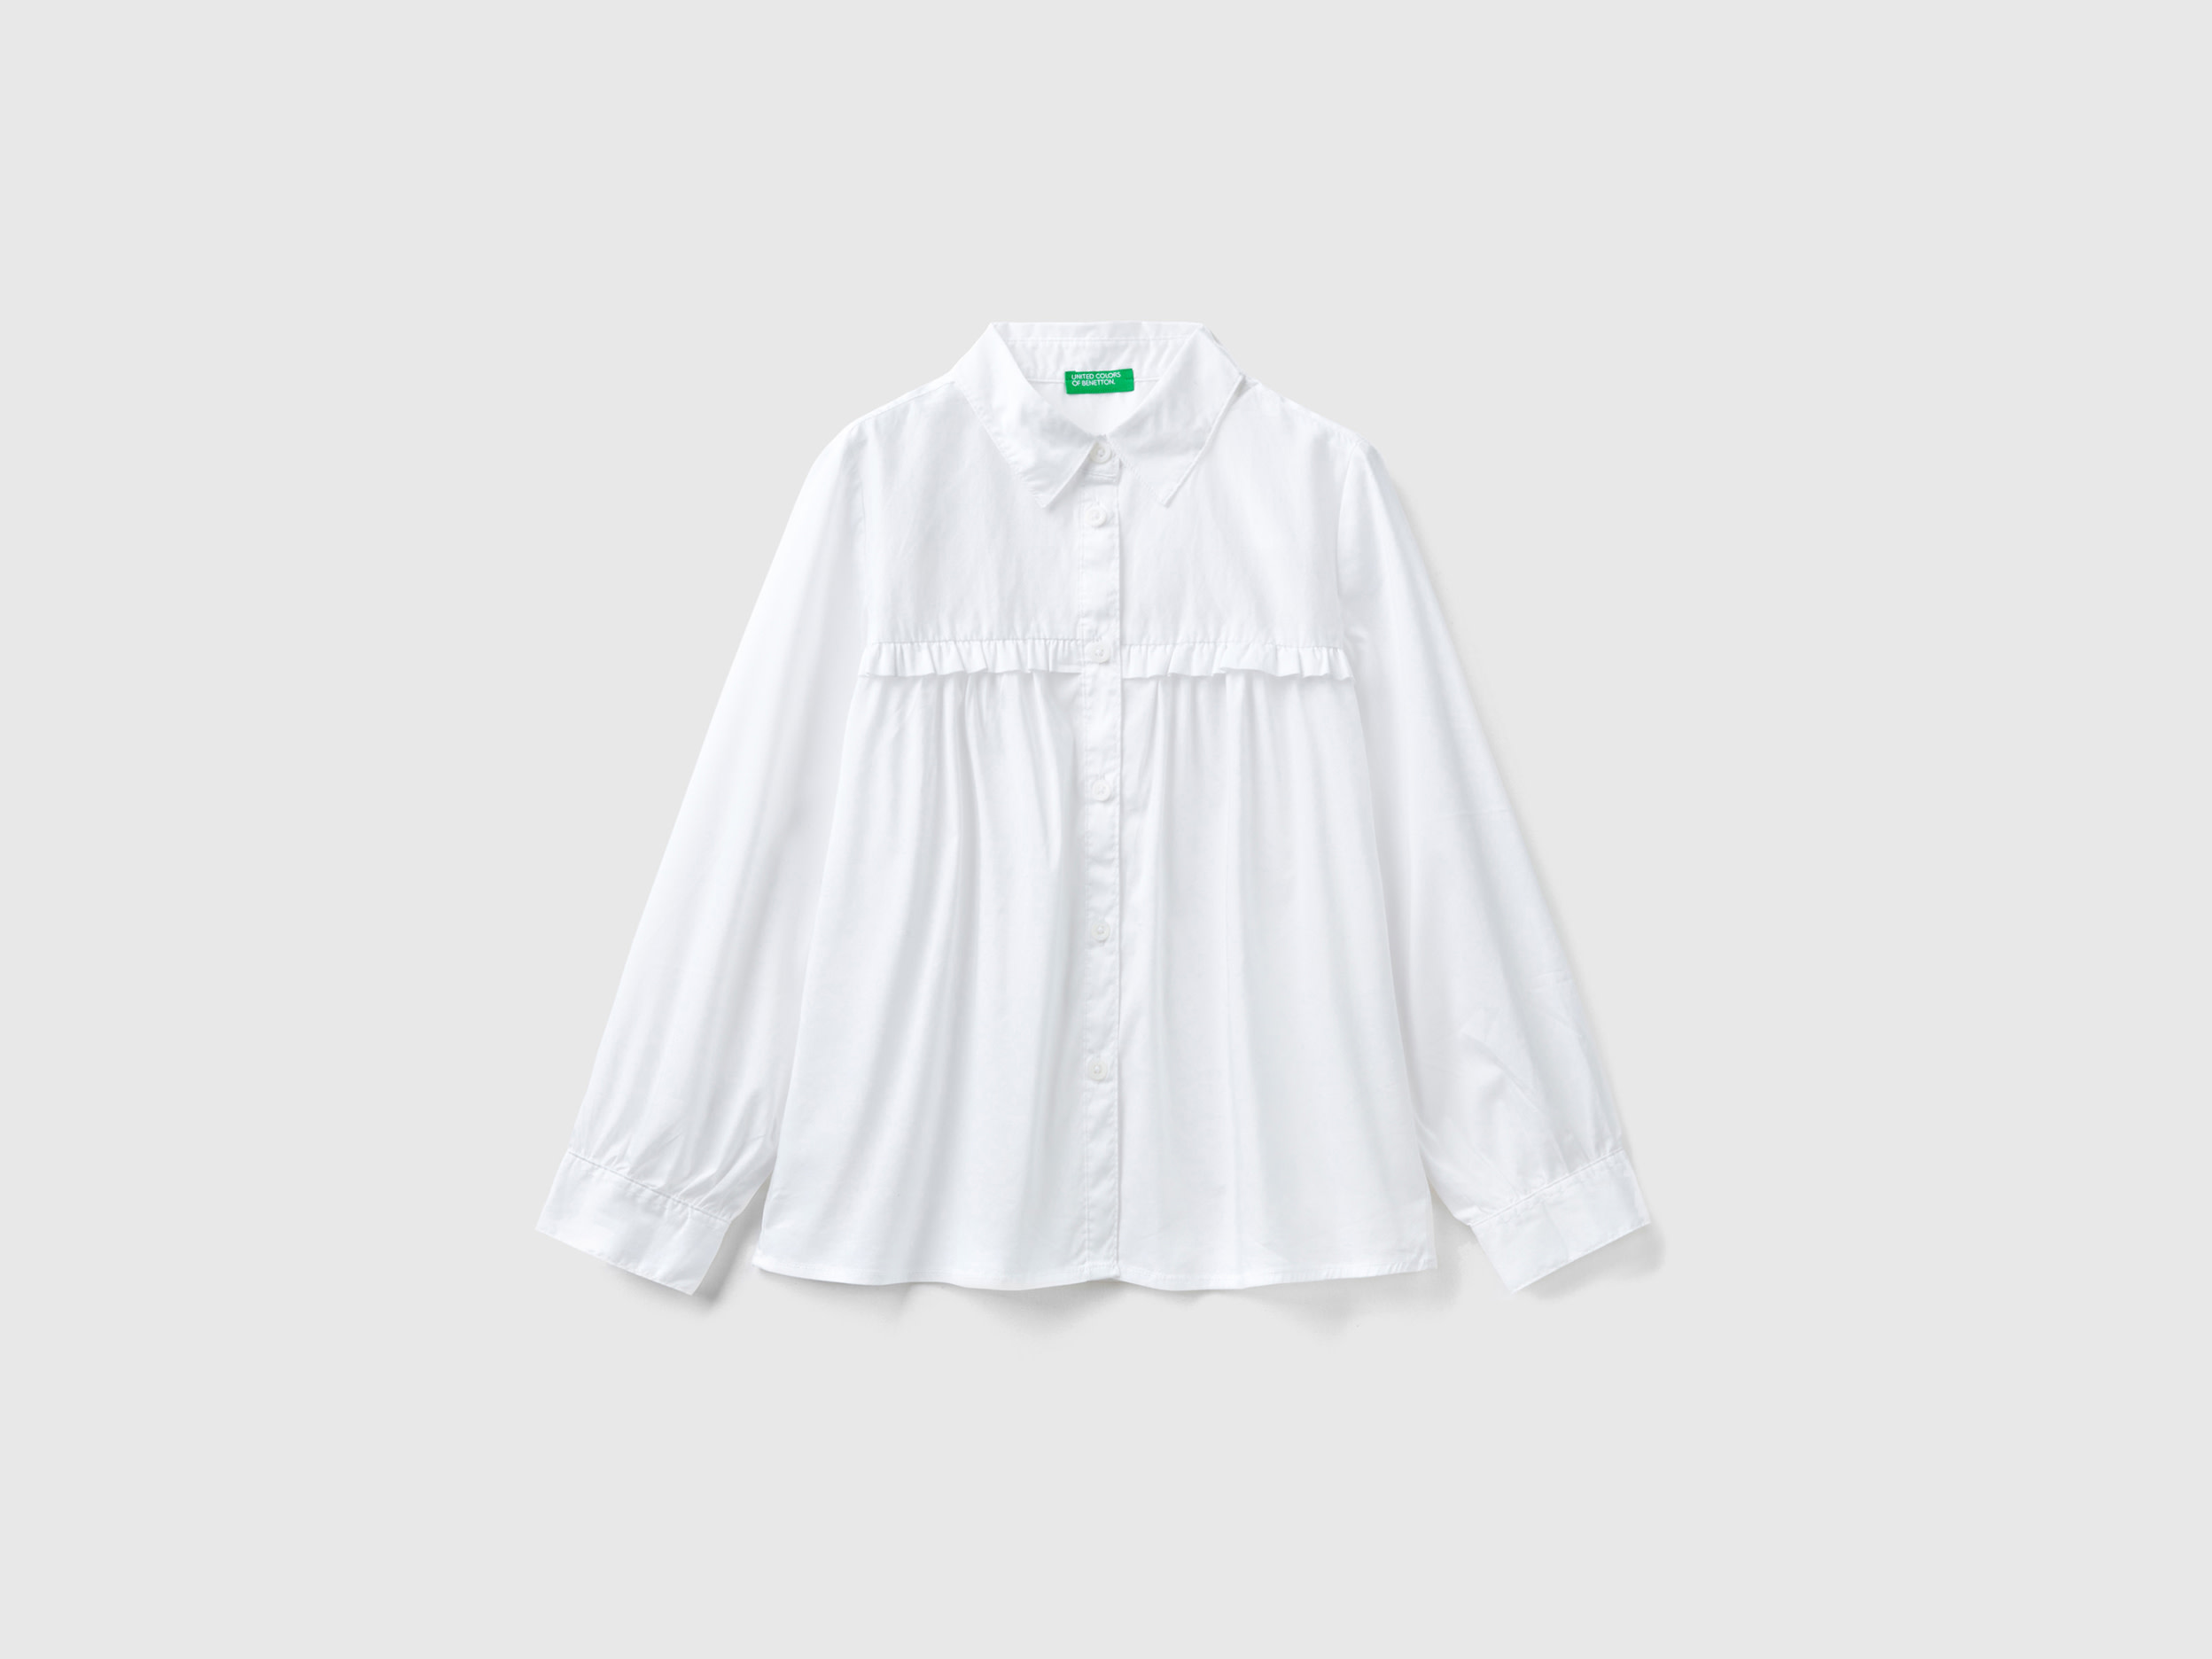 Benetton, Shirt With Rouches On The Yoke, size M, White, Kids